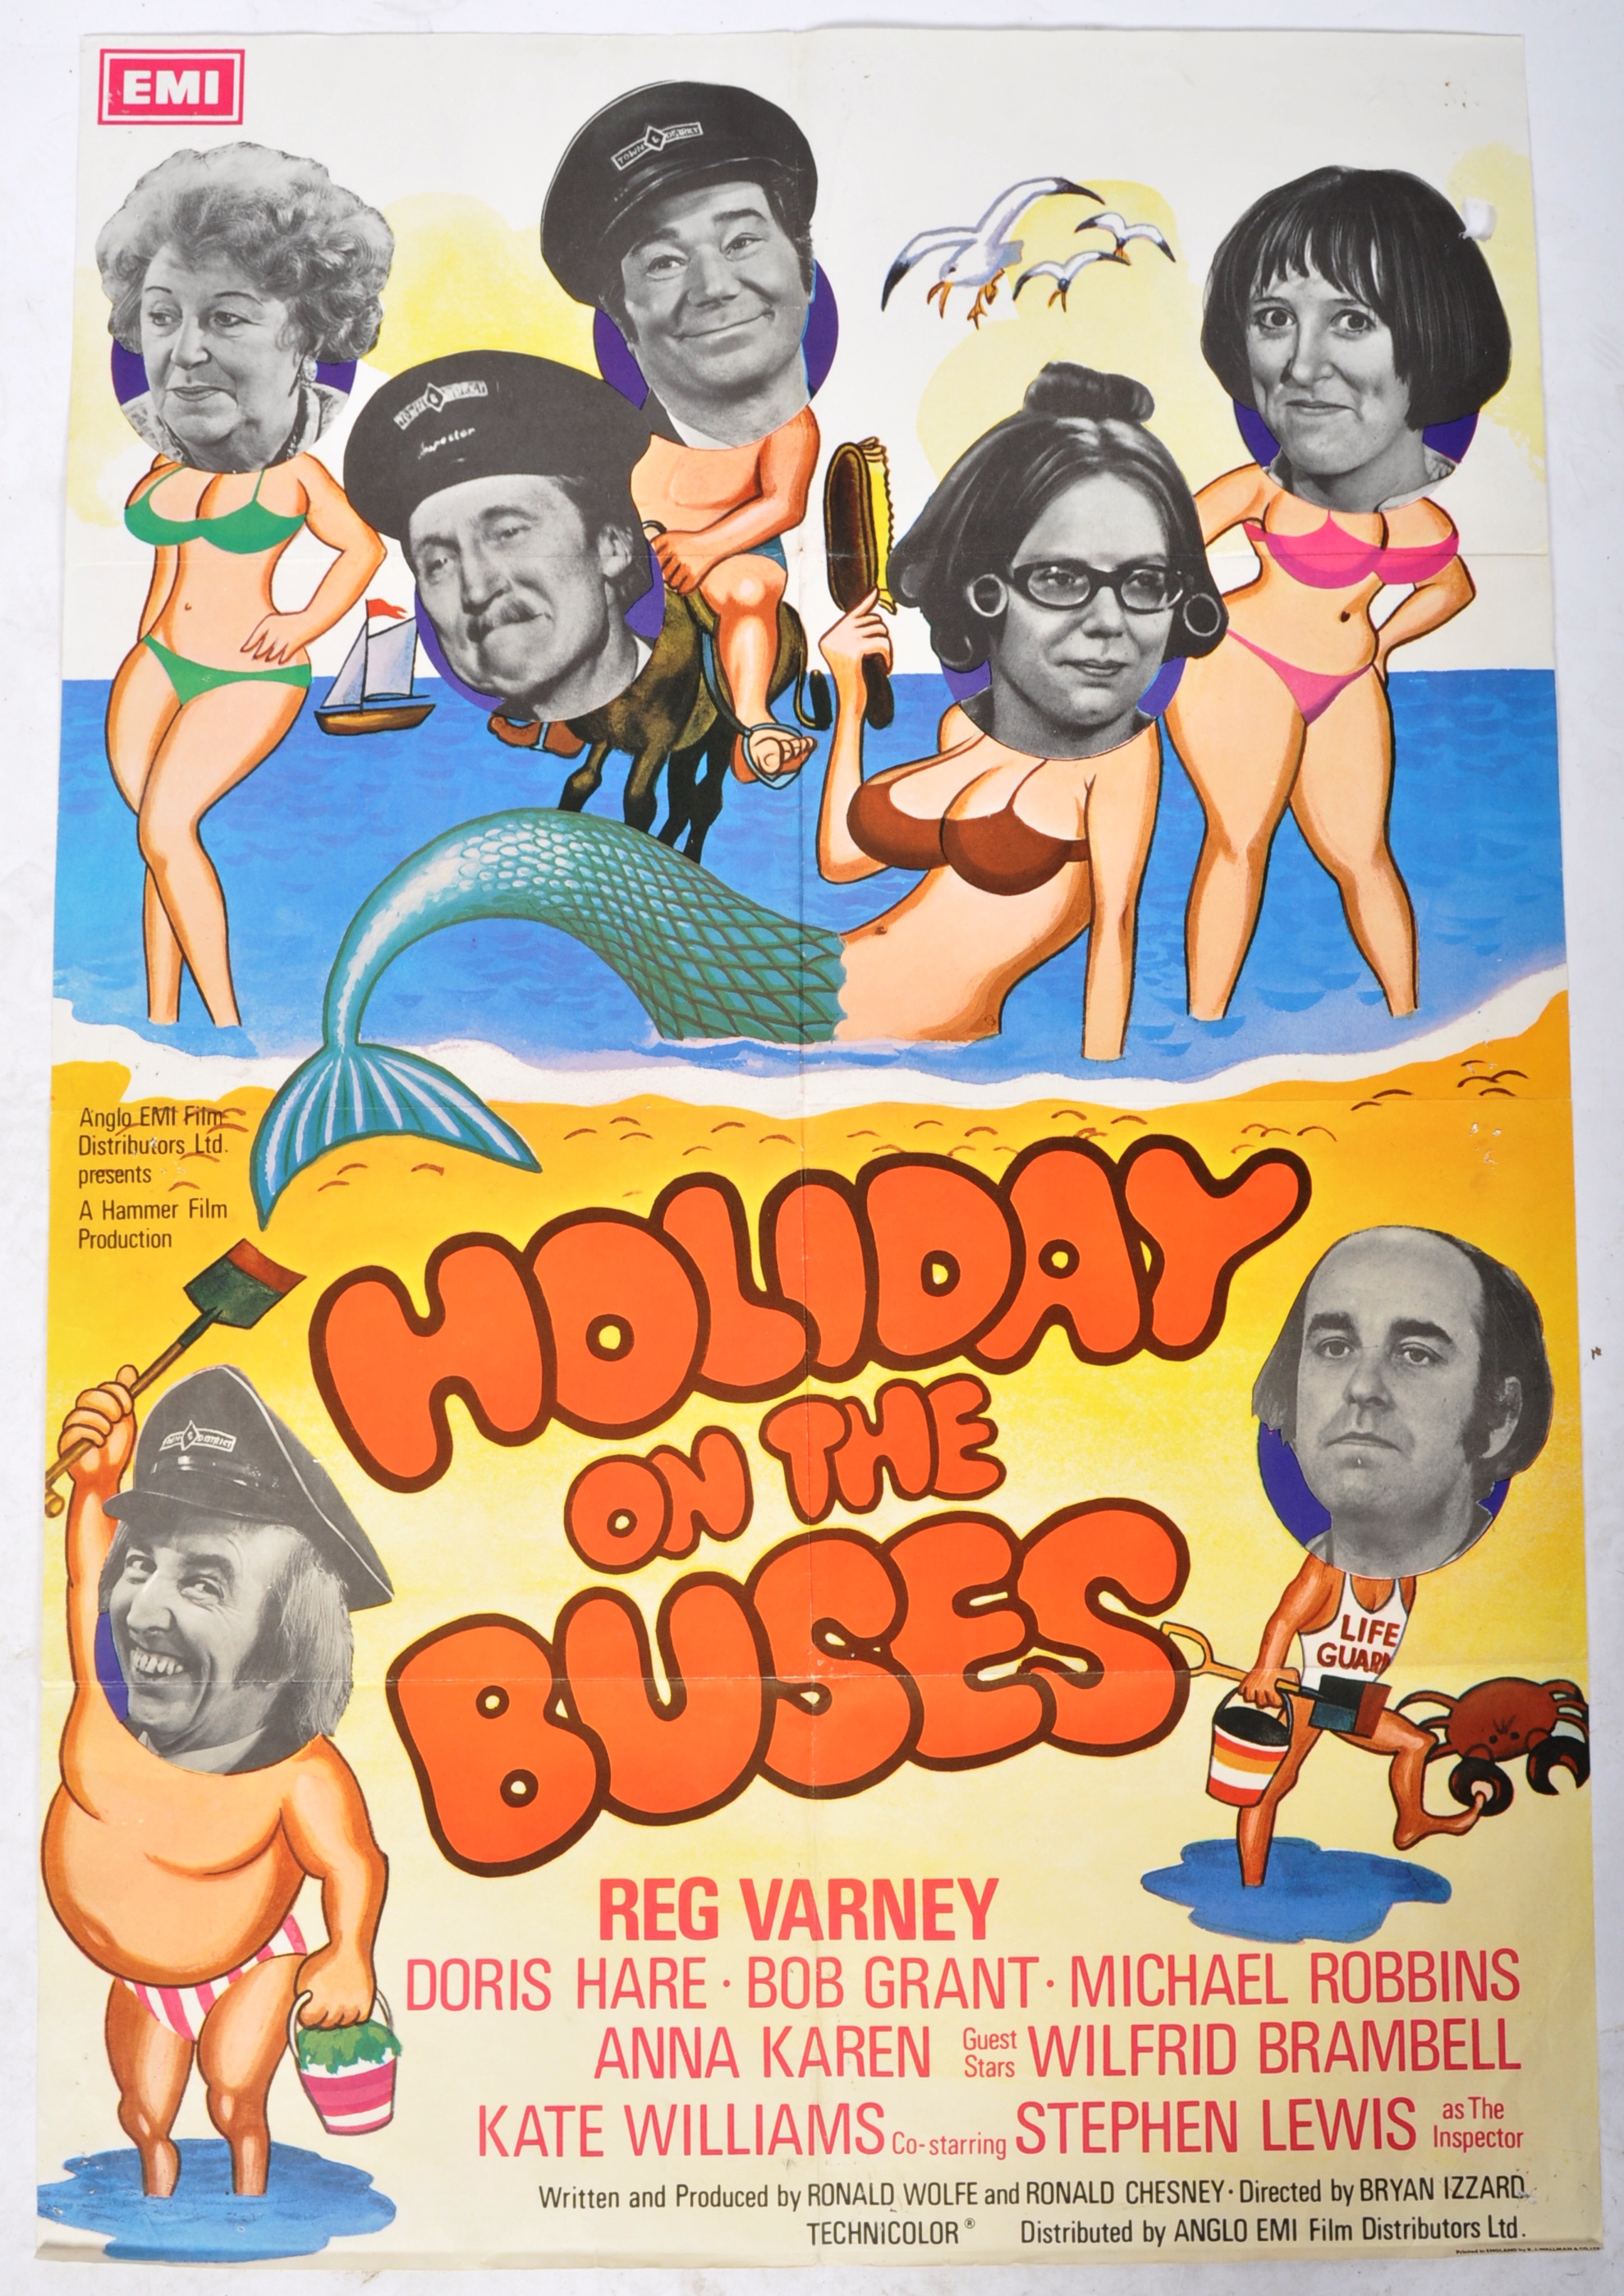 ON THE BUSES VINTAGE MOVIE CINEMA POSTER - Image 2 of 4